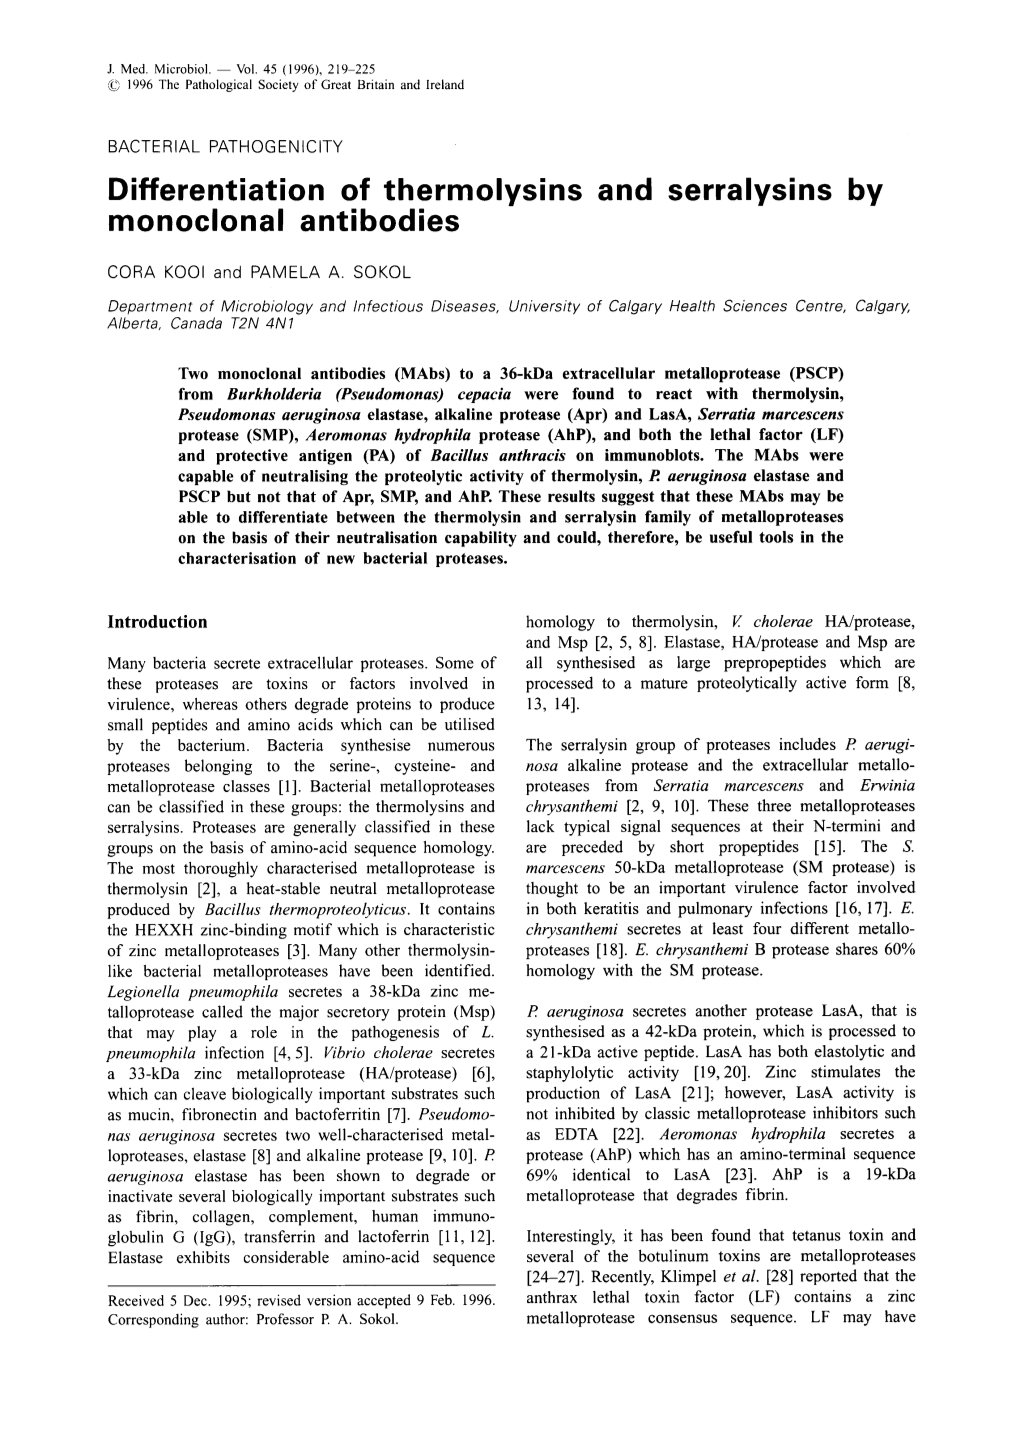 Differentiation of Thermolysins and Serralysins by Monoclonal Antibodies